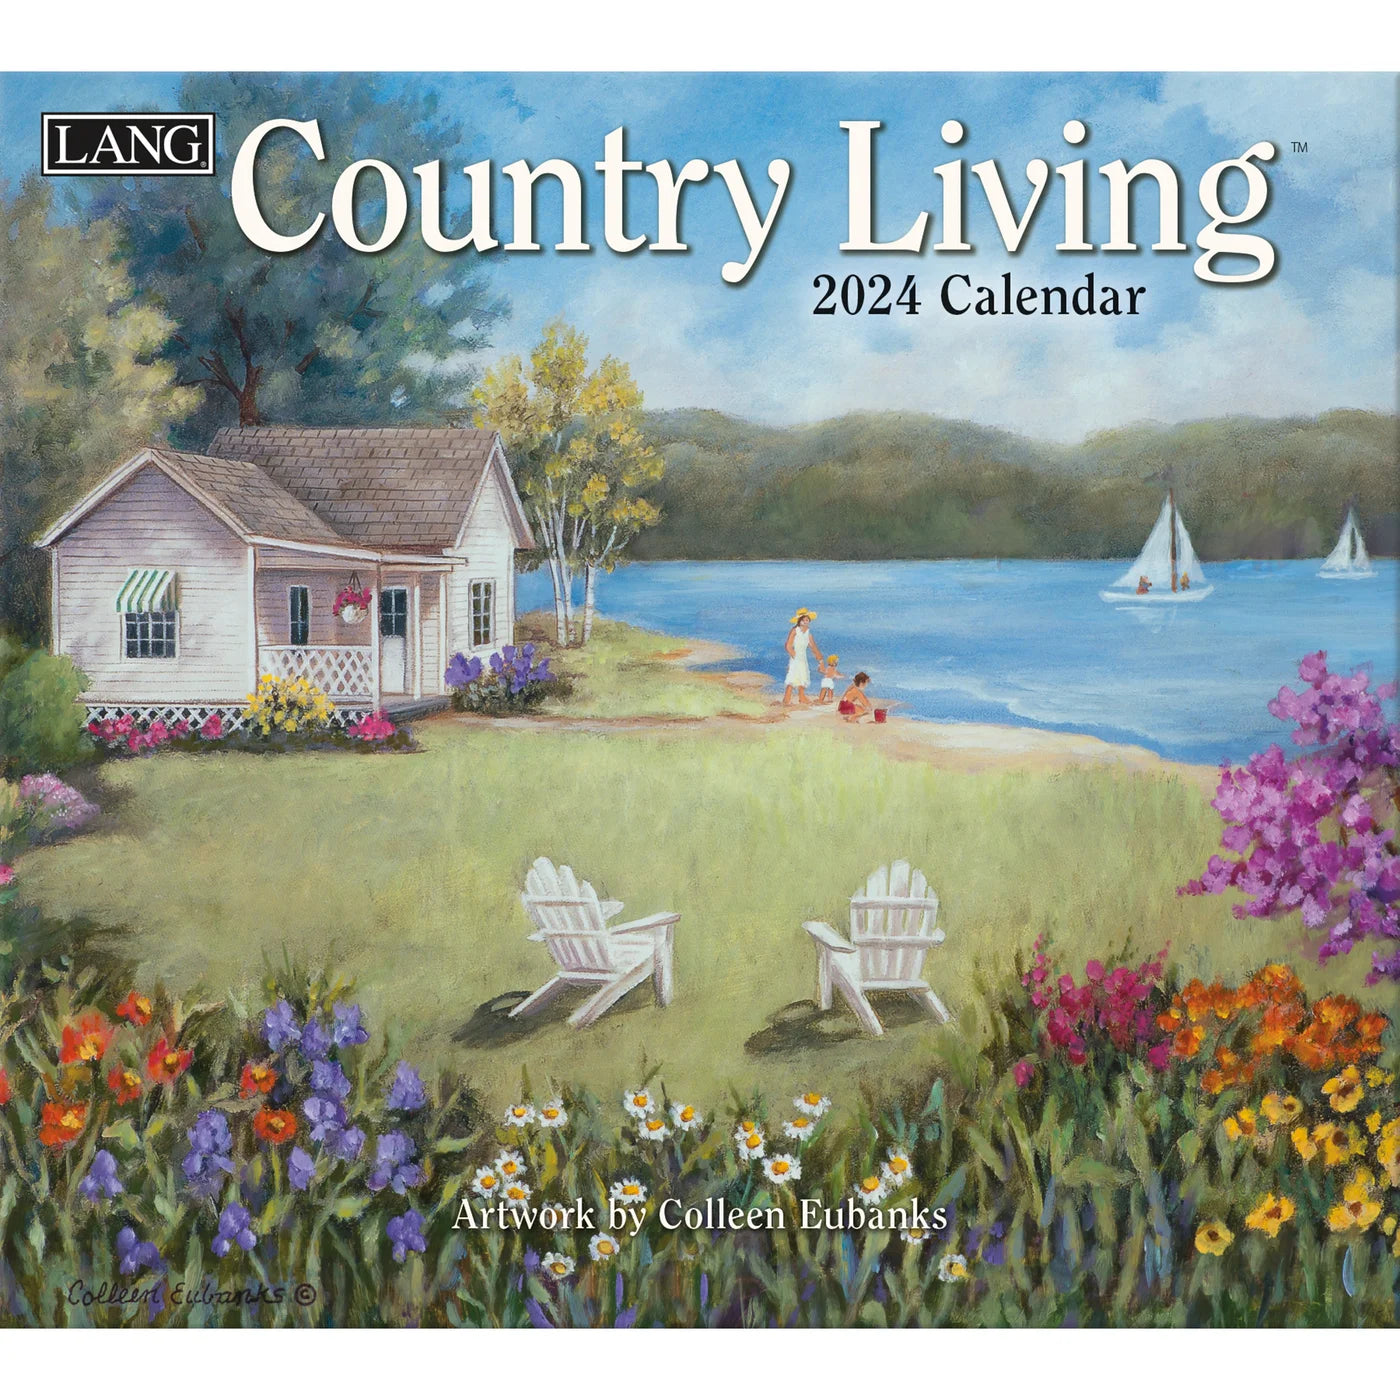 2024 LANG Country Living By Colleen Eubanks - Deluxe Wall Calendar